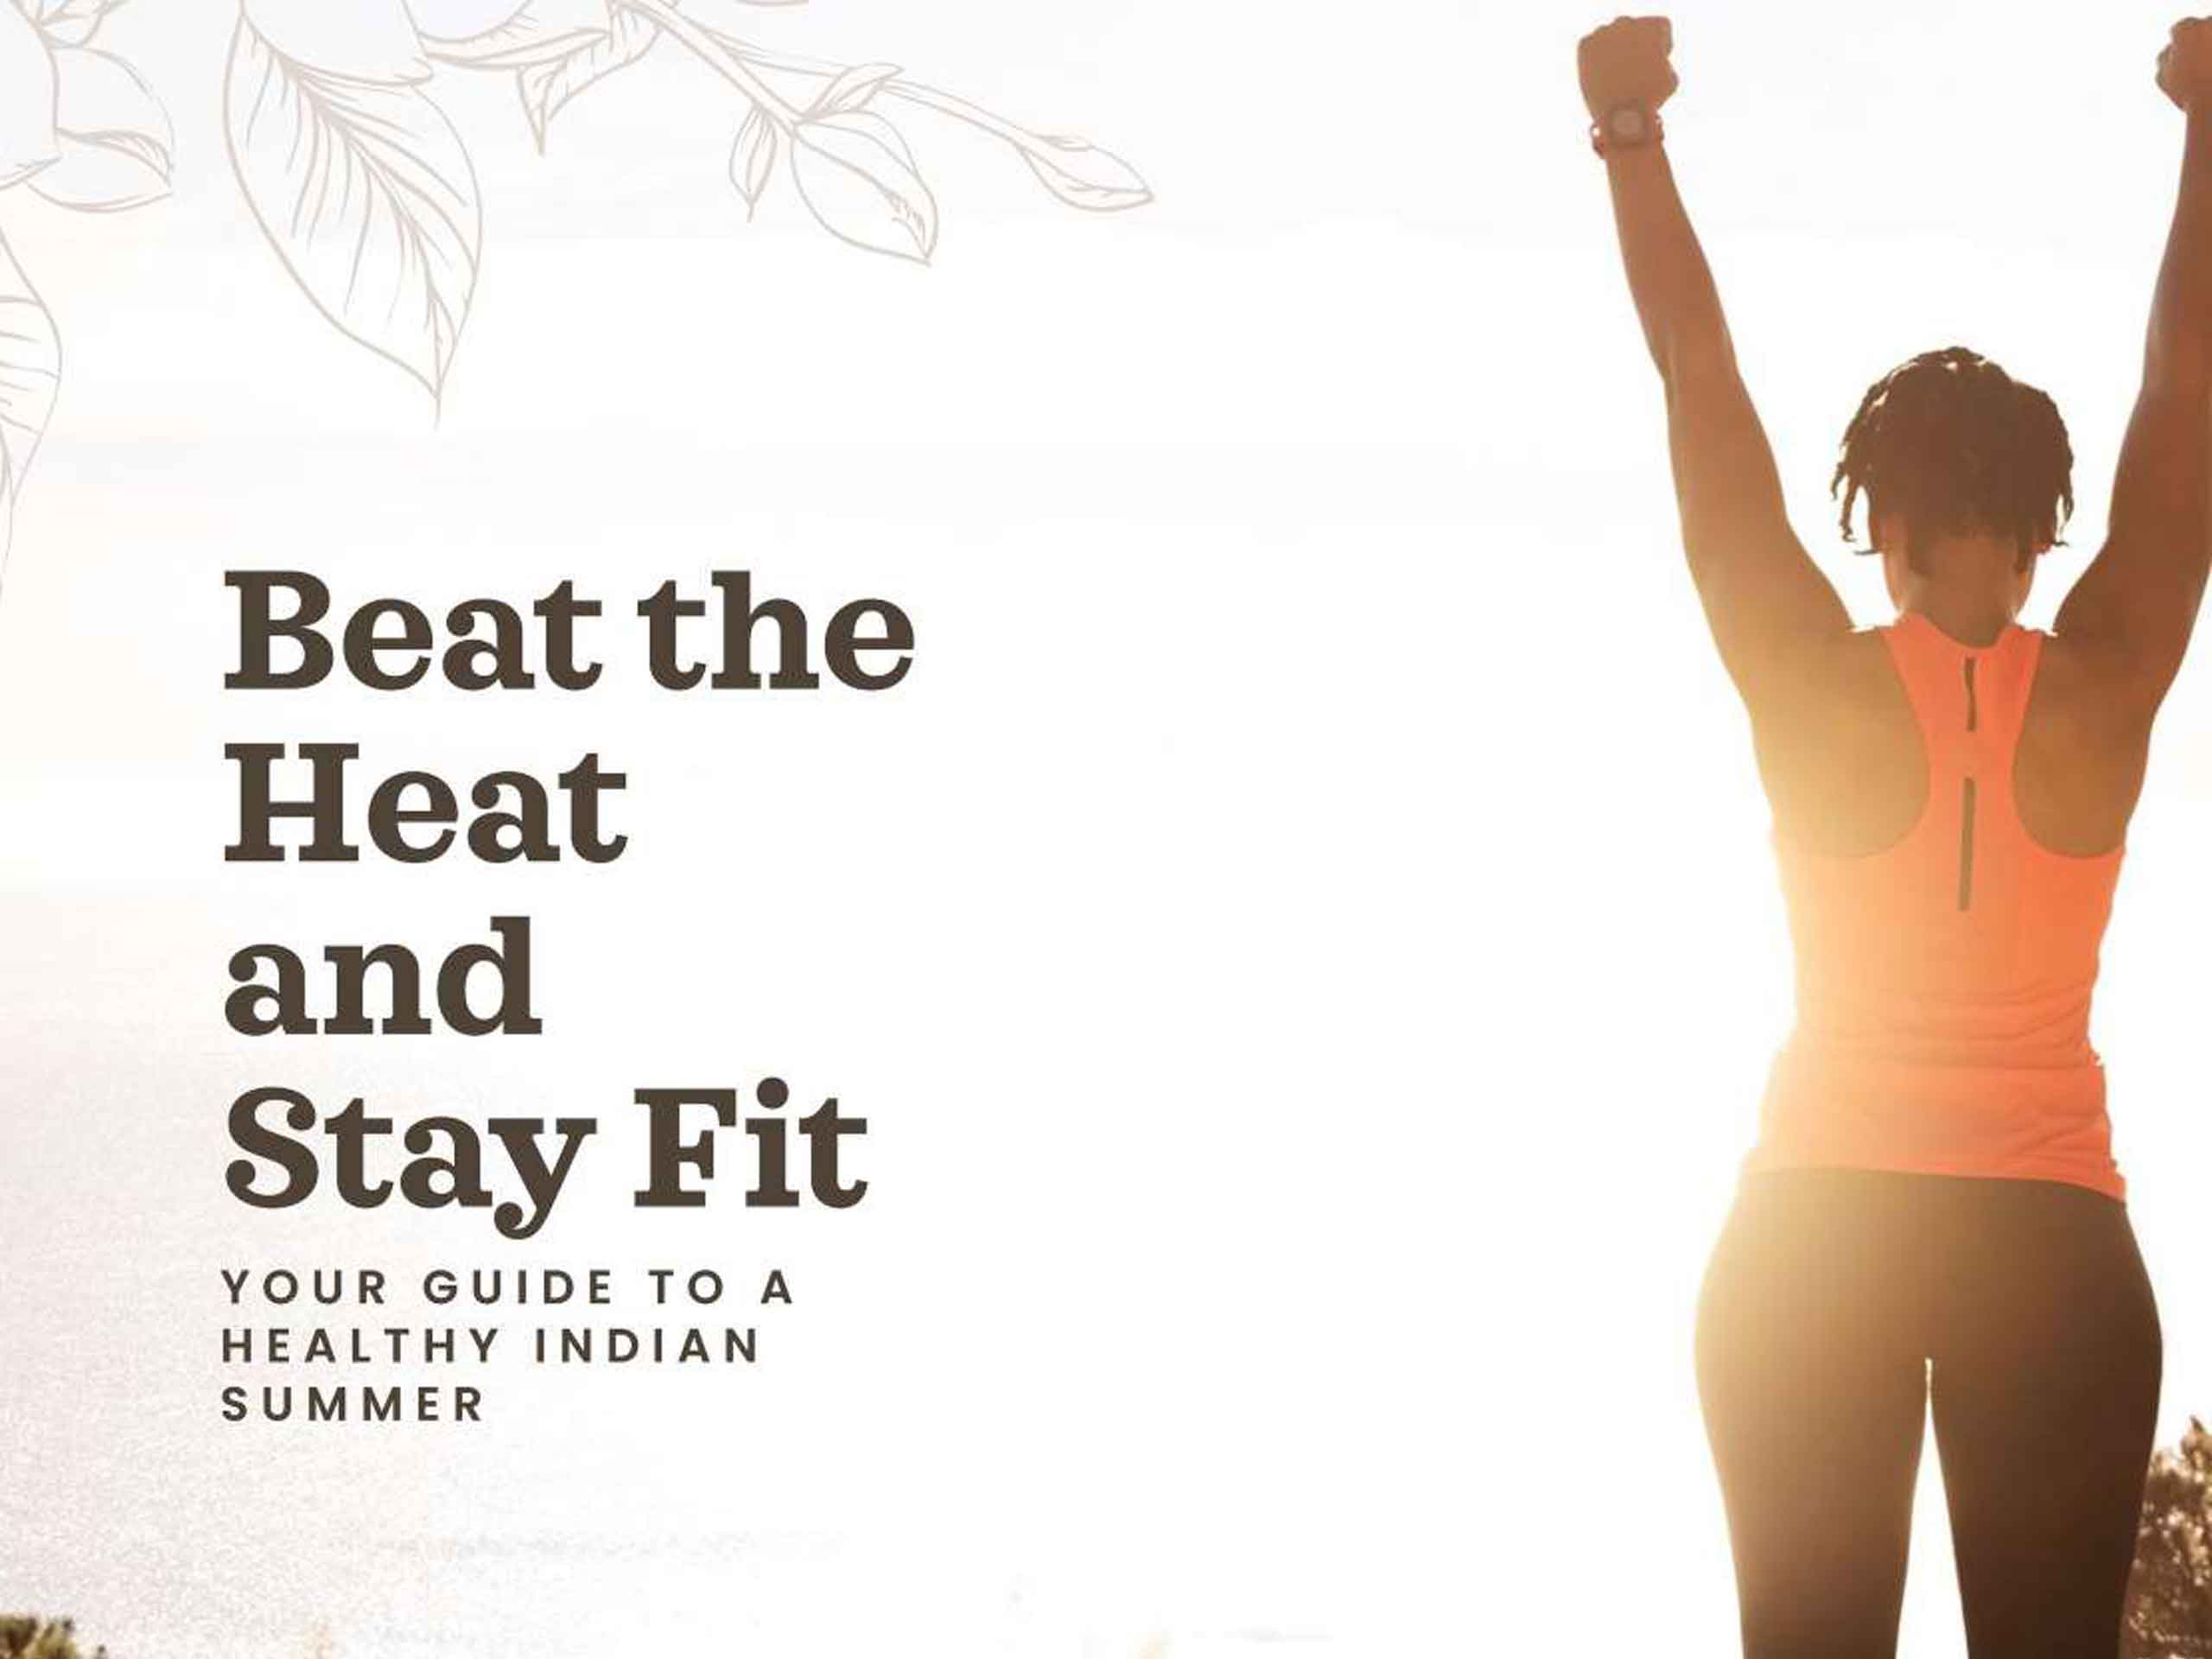 Beat the Heat and Stay Fit: Your Guide to a Healthy Indian Summer